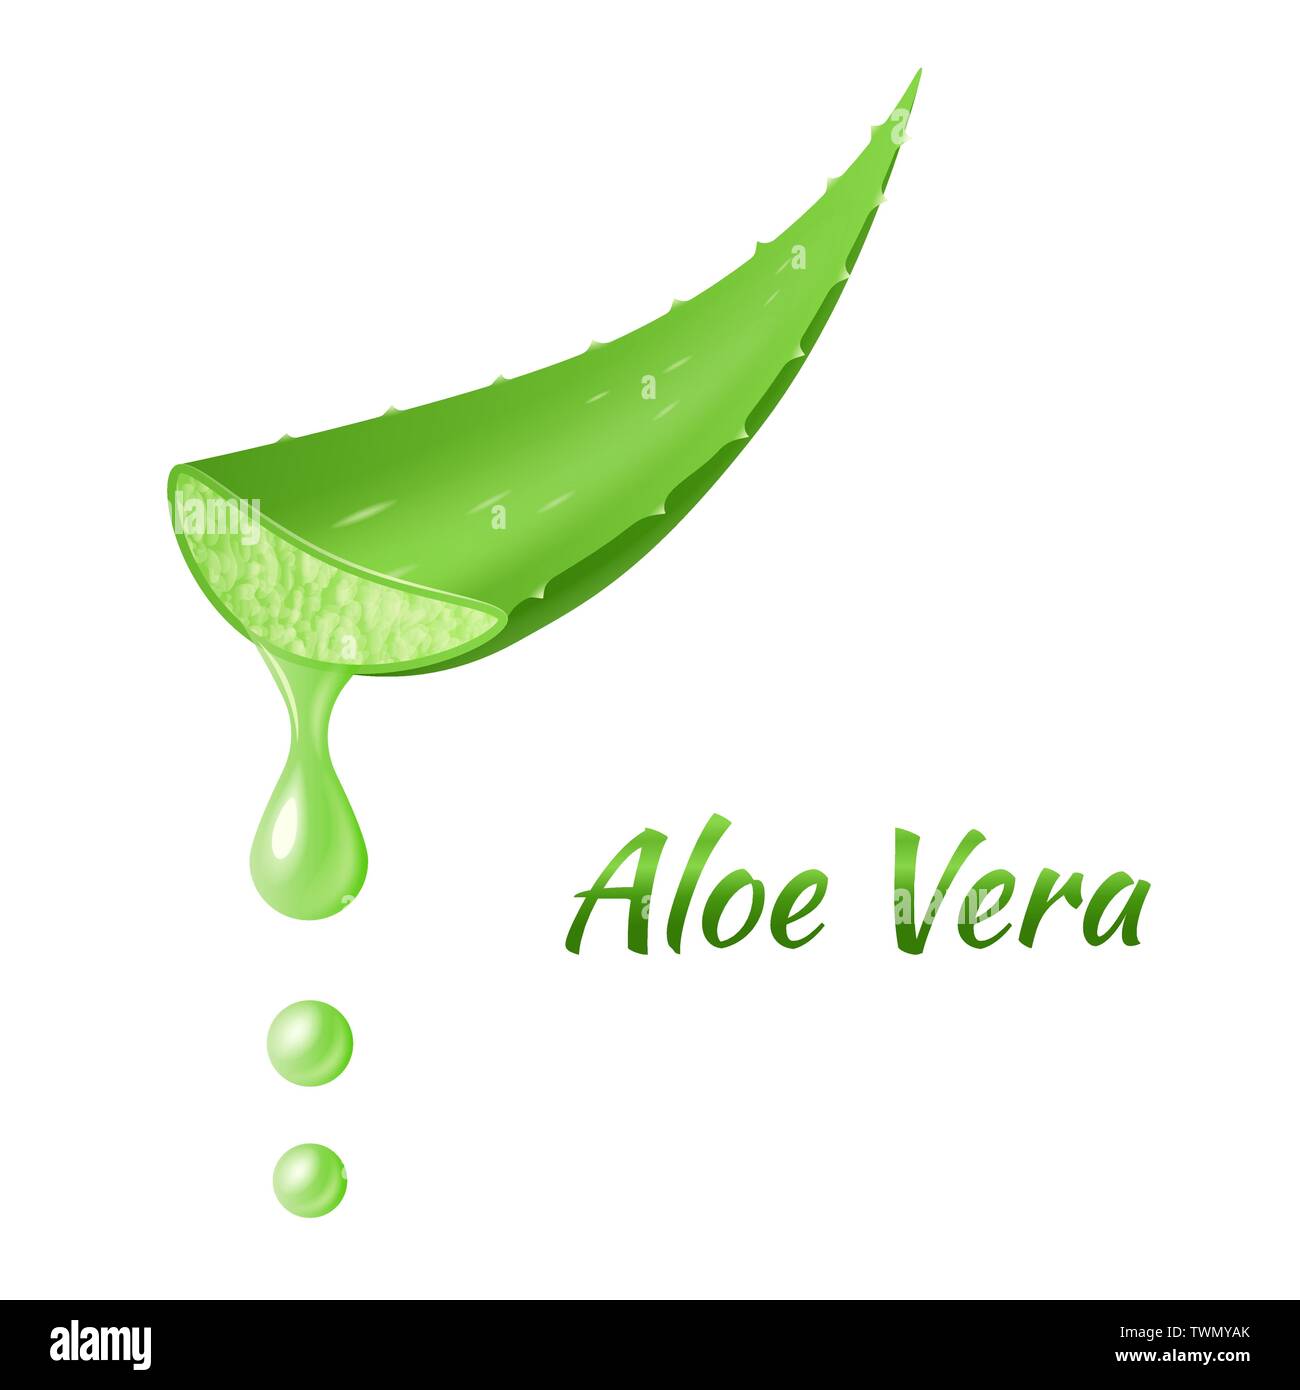 Aloe Vera leaf, realistic green plant, leaves or cut pieces with aloe dripping juice Stock Vector